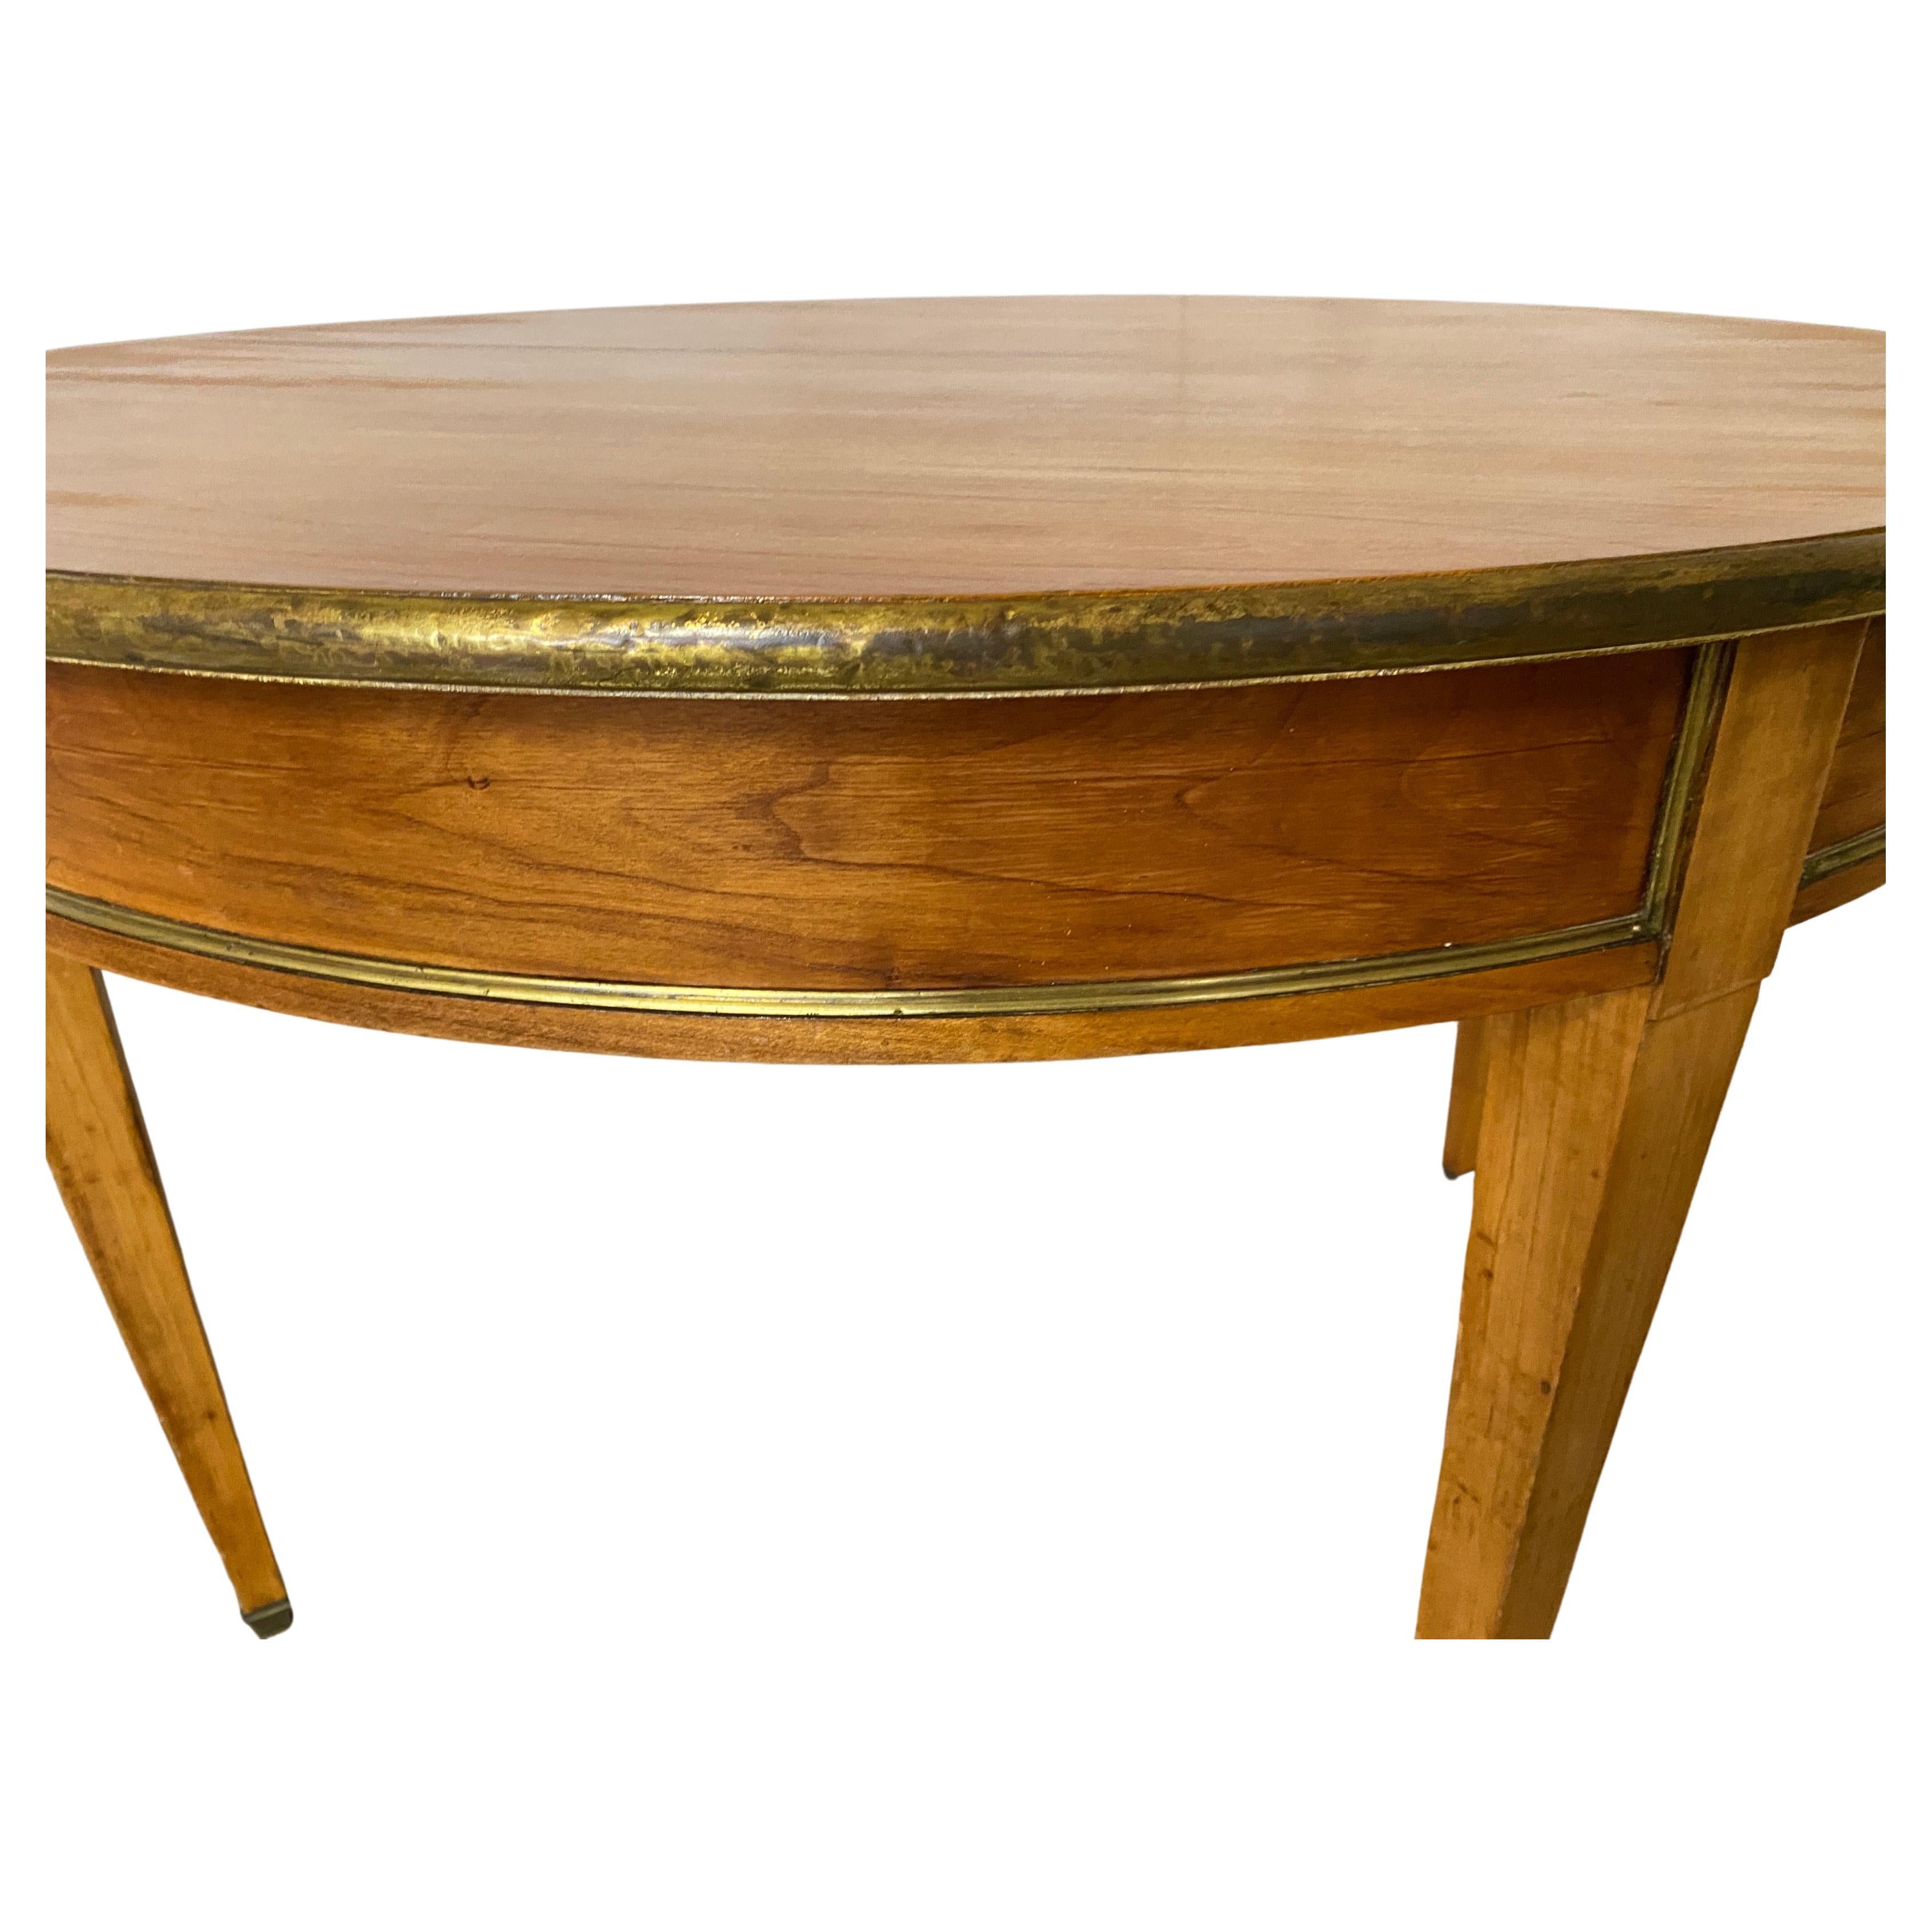 19th century fine circular dining table with all around brass trim and a thinner one on the lower edge of the skirt, tapered leg terminating in brass casters. Strong Viennese Biedermeier or Neo-Classical influence. The simplicity of design and light